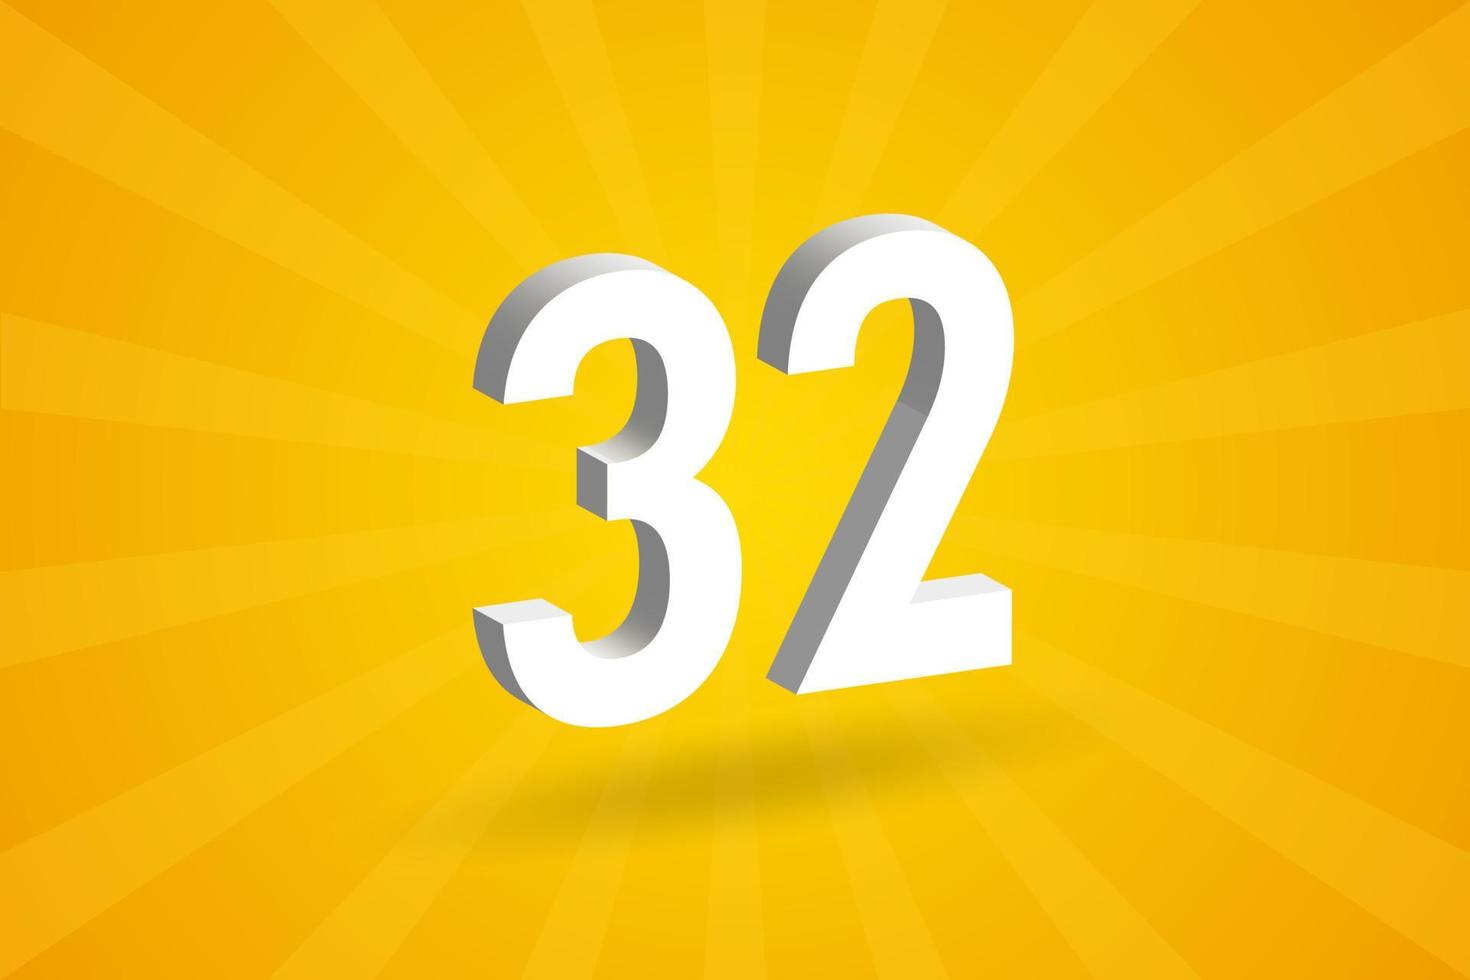 3D 32 number font alphabet. White 3D Number 32 with yellow background vector